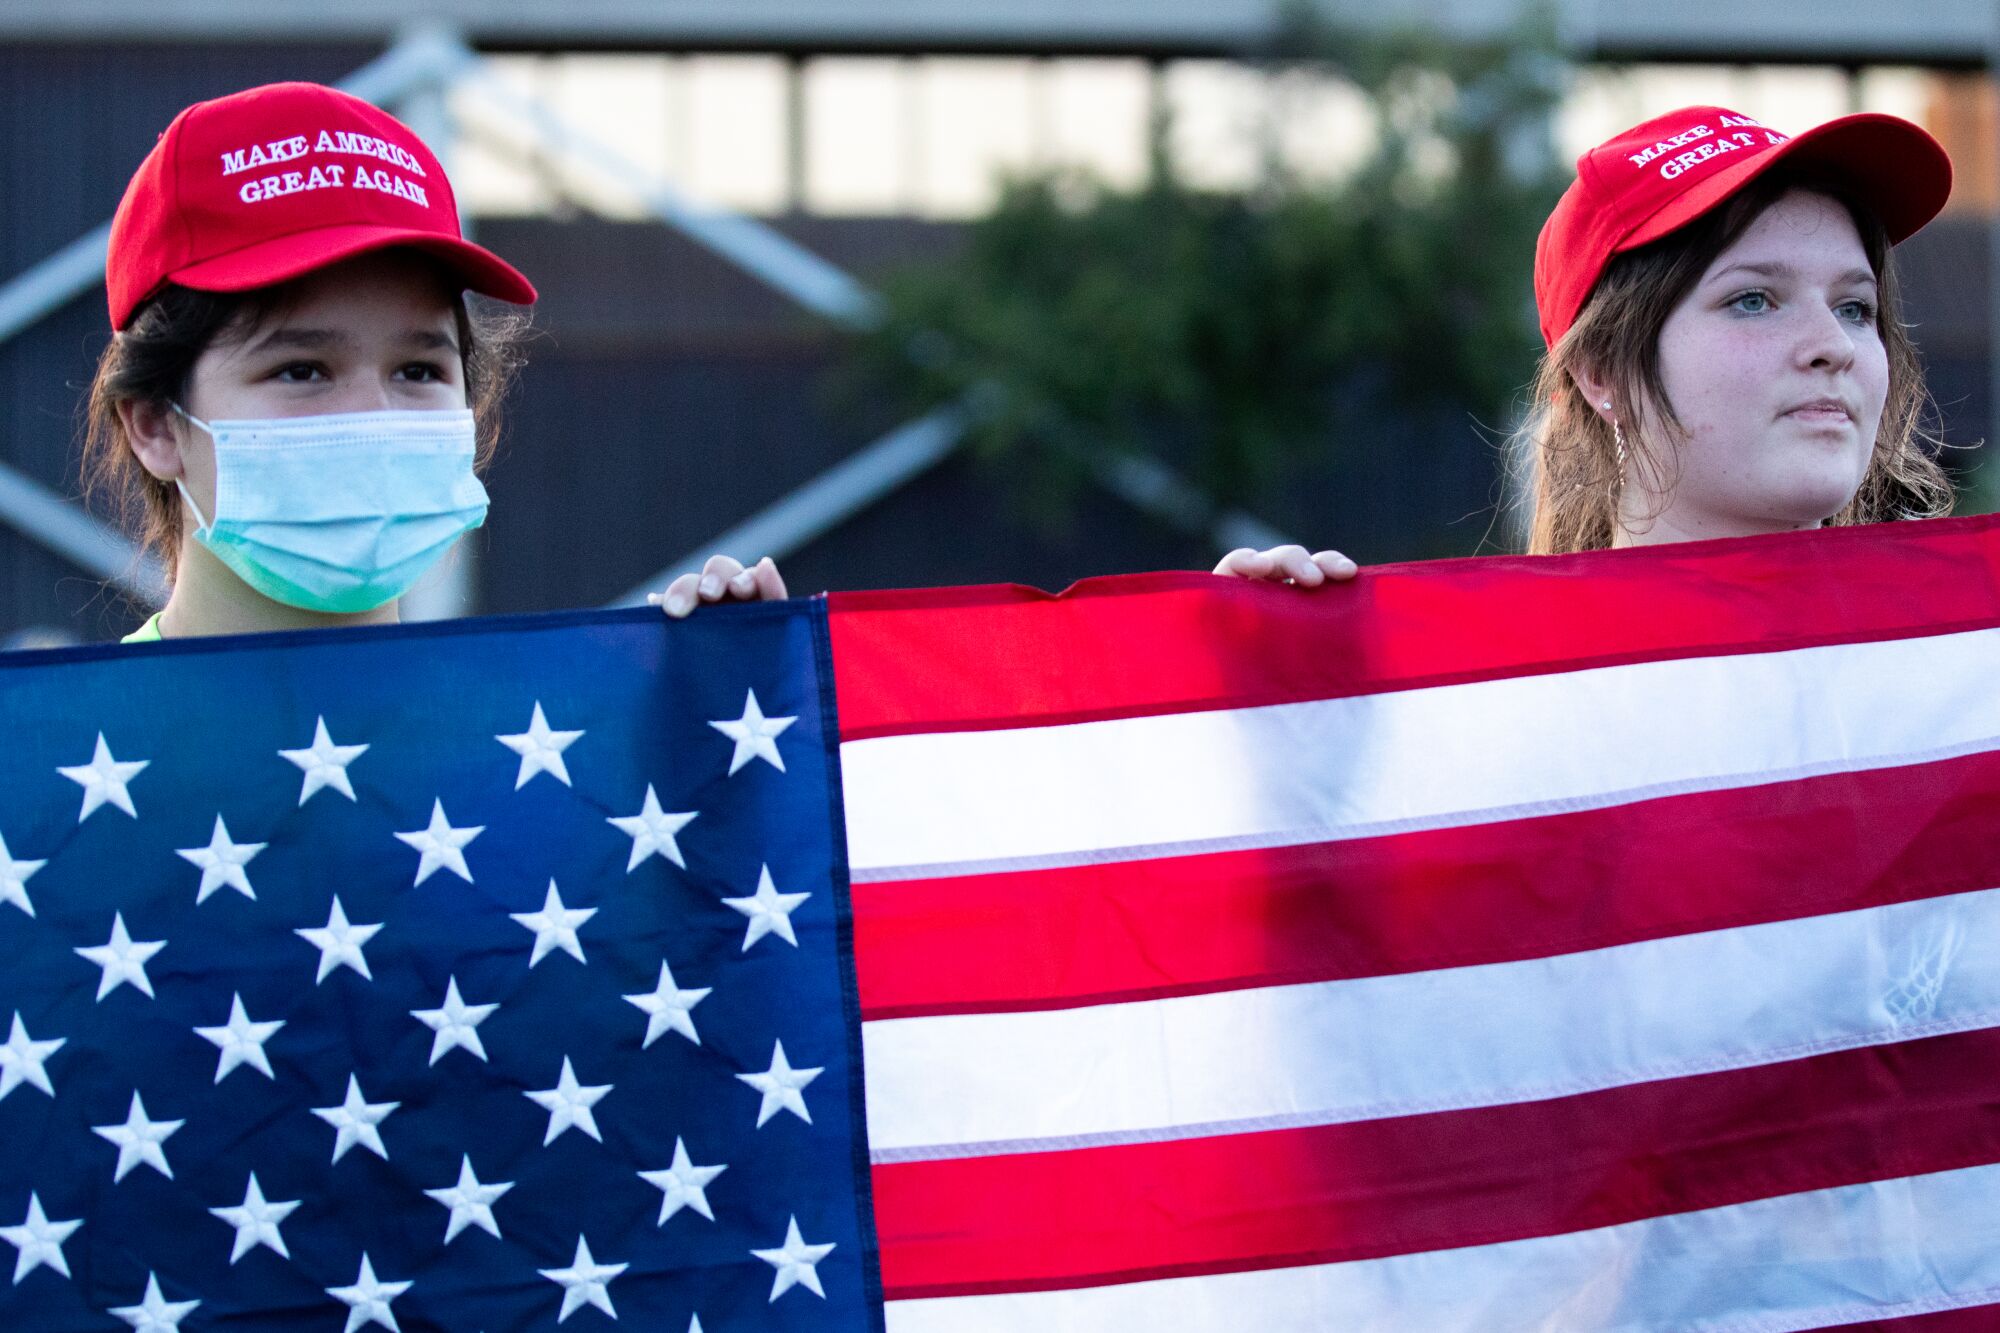 Two young people wearing red Make America Great Again hats hold up a U.S. flag
